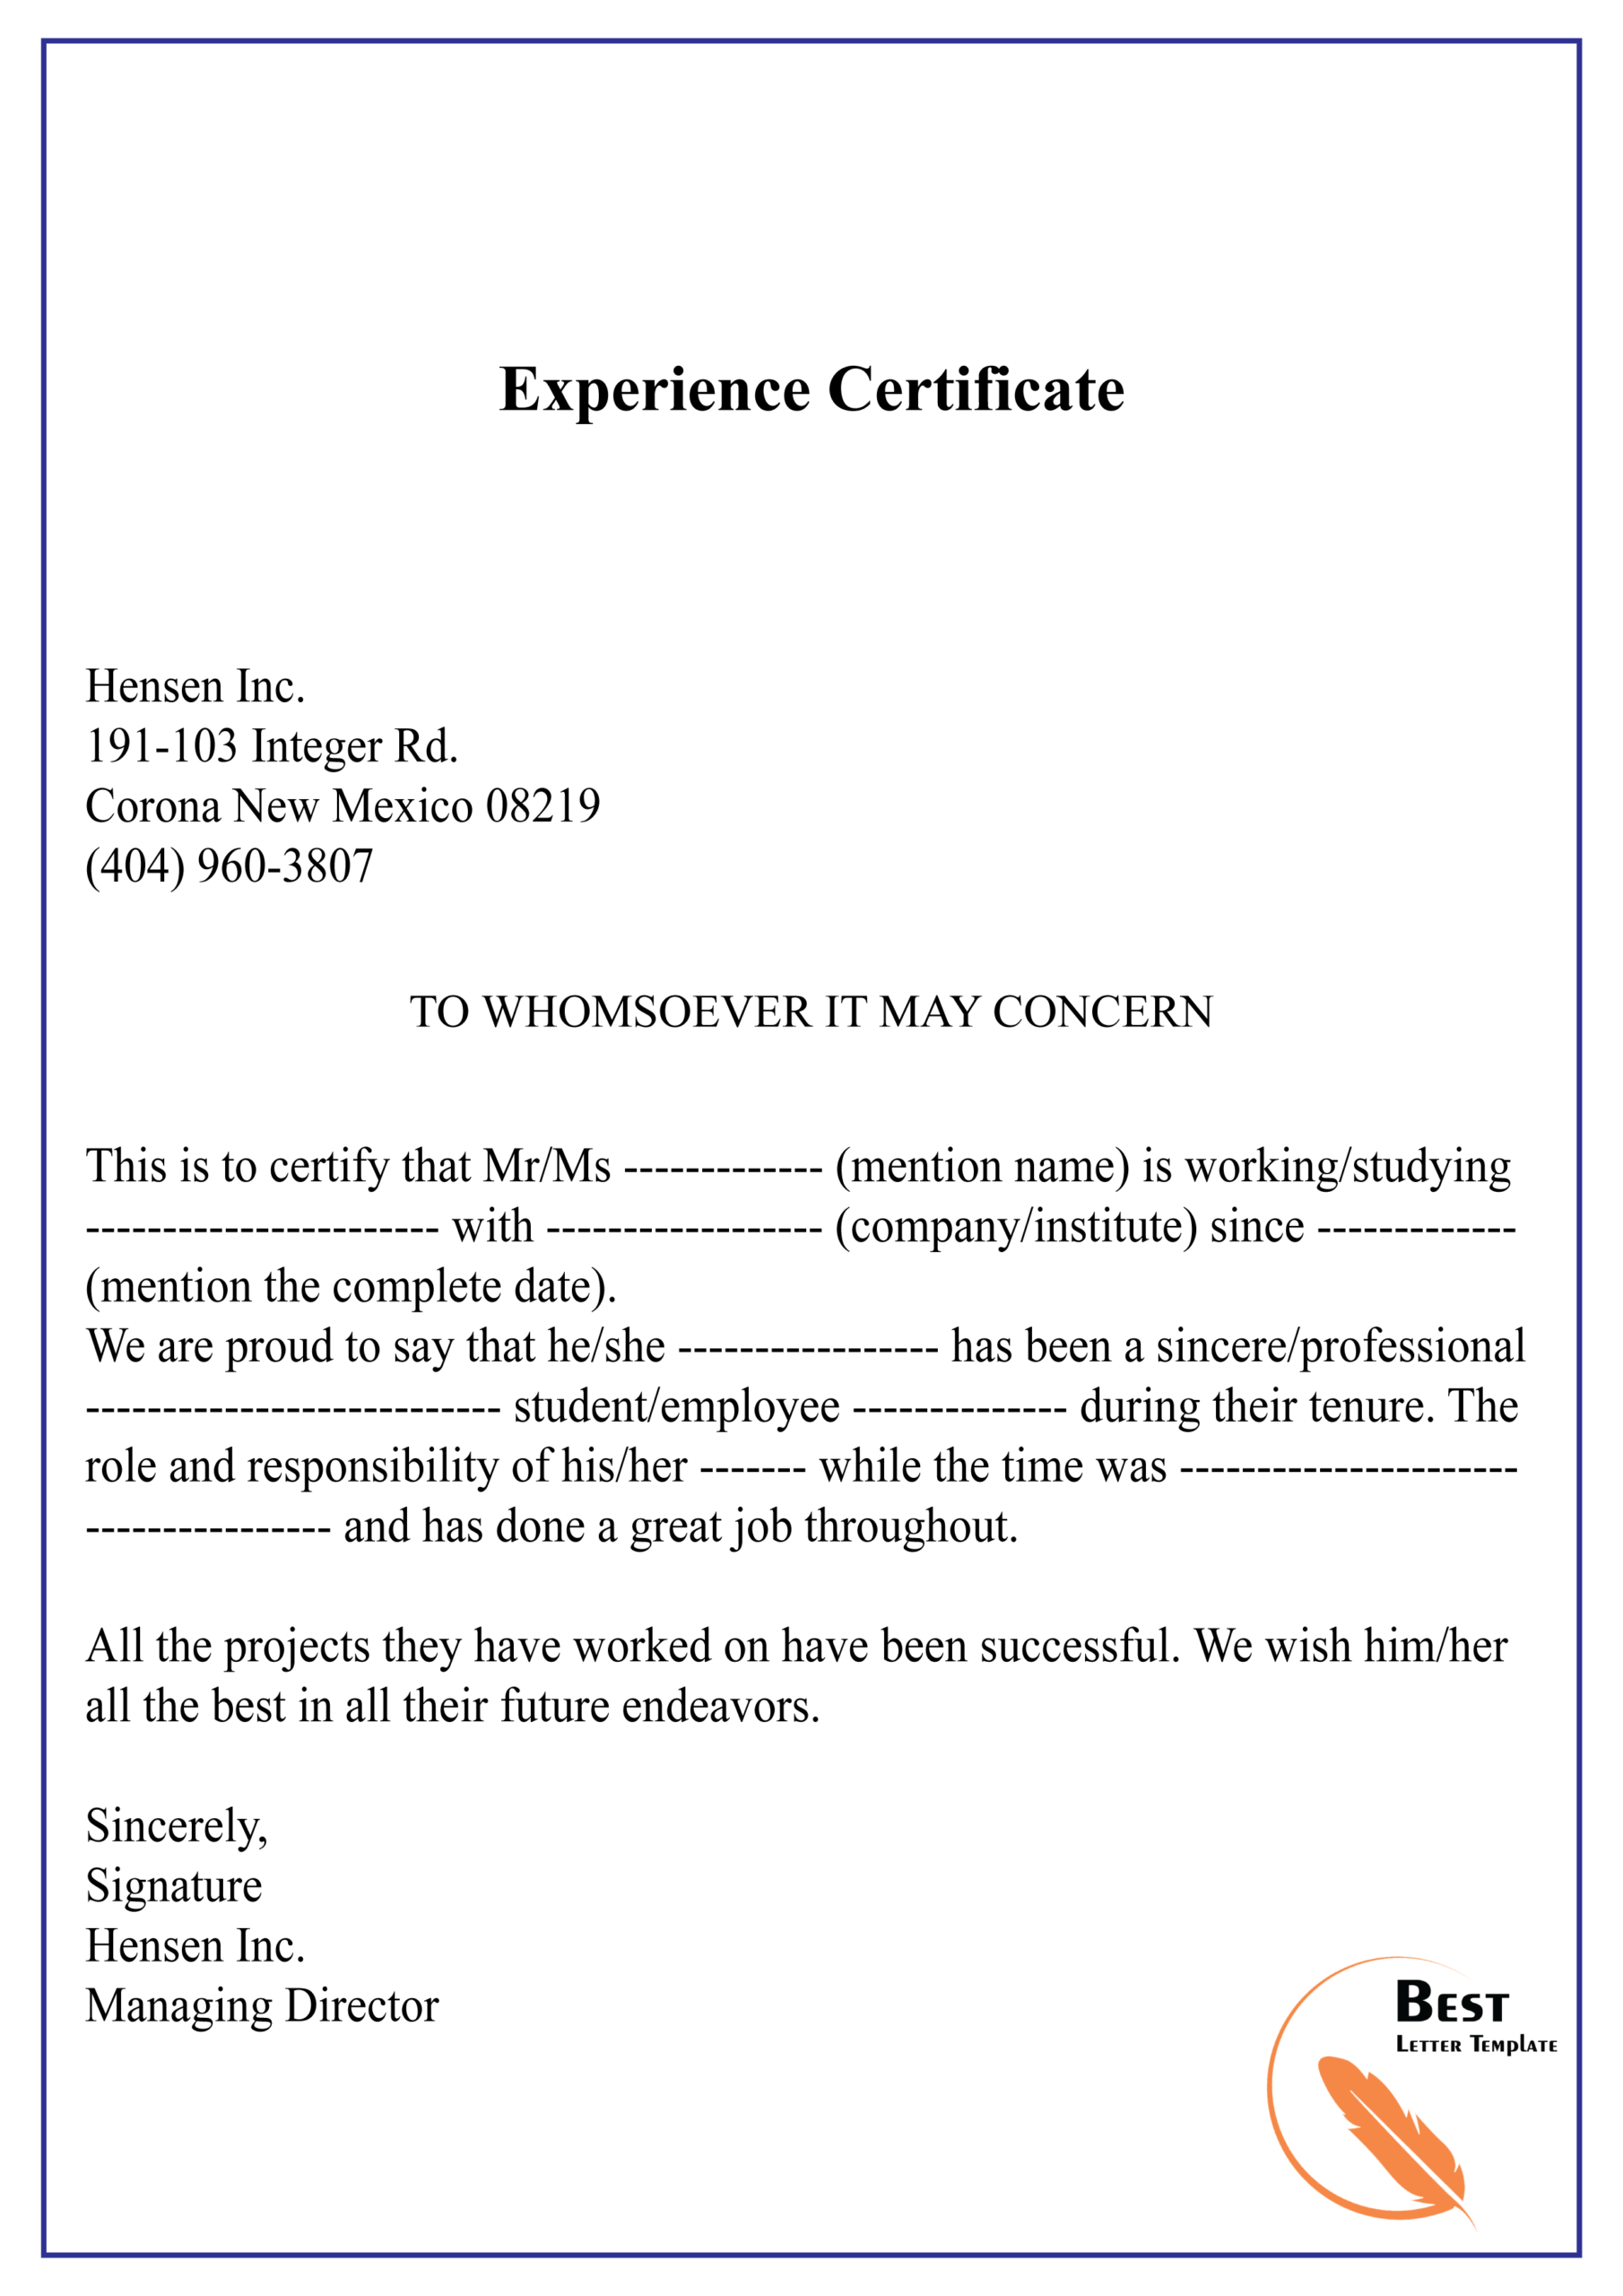 Experience Certificate 01 | Best Letter Template Intended For Template Of Experience Certificate